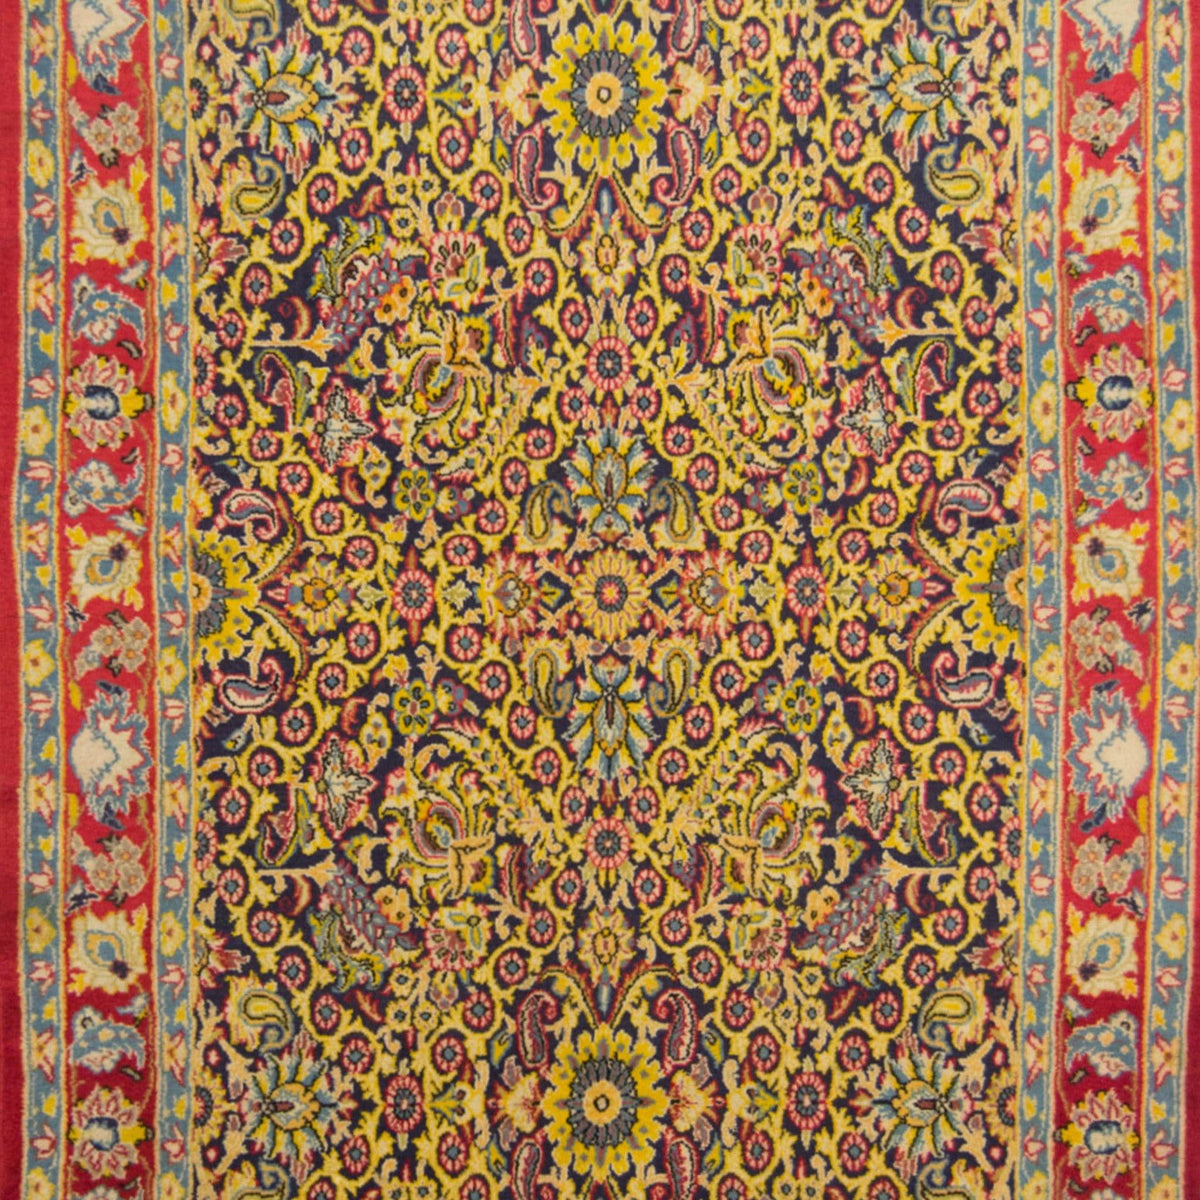 Authentic Hand-knotted Wool Persian Viss Rug 154cm x 305cm